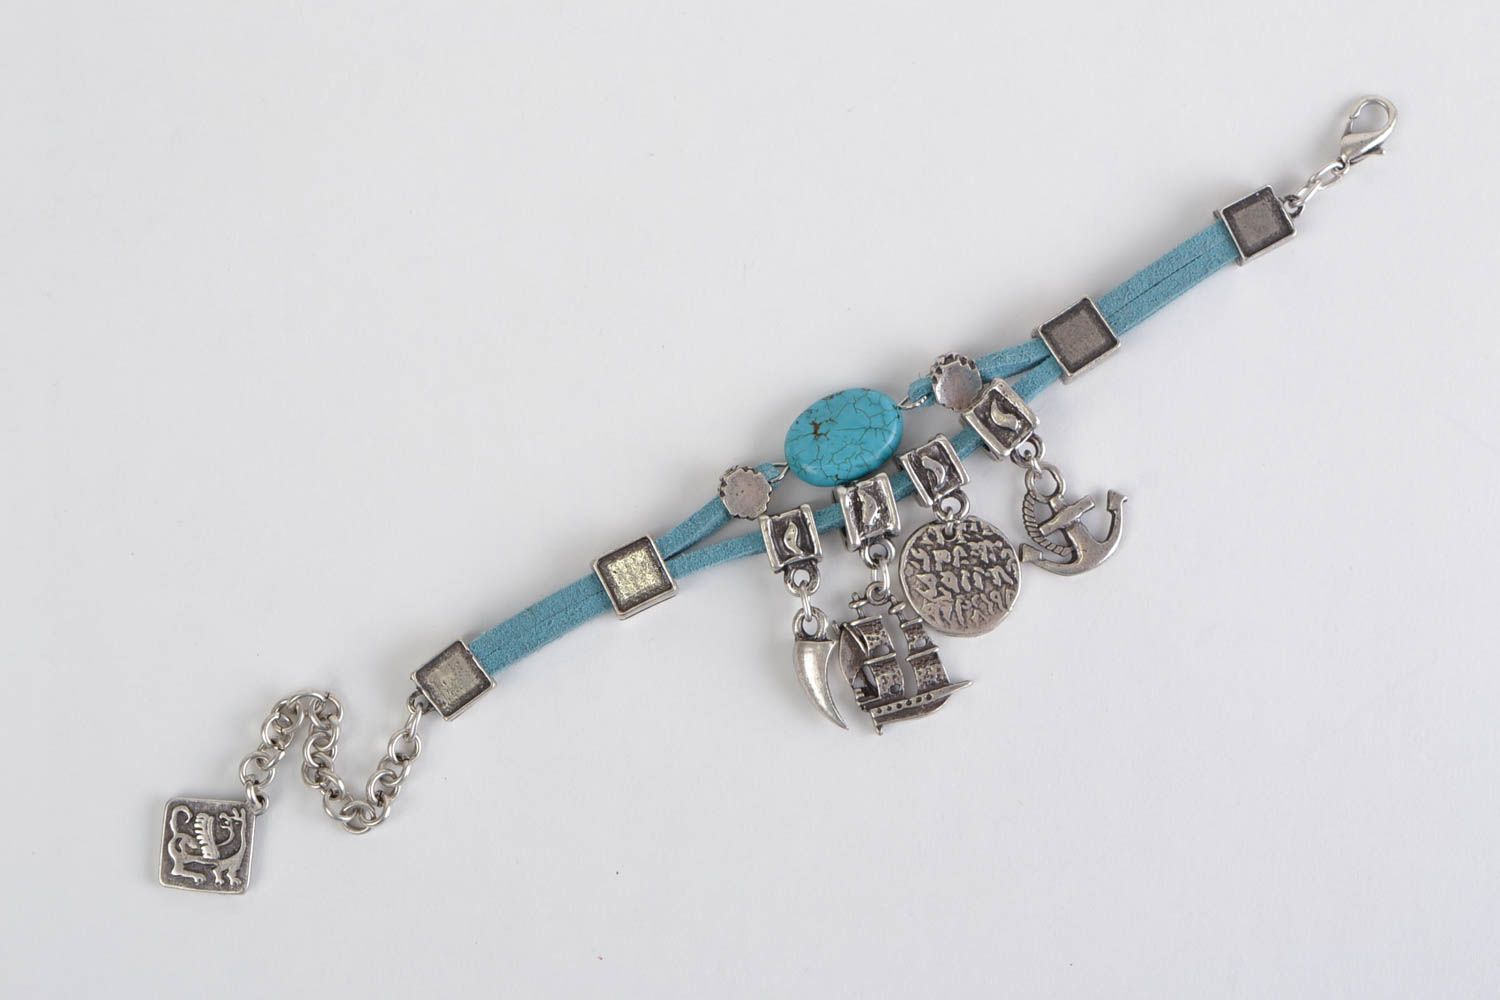 Handmade leather cord wrist bracelet with metal charms and turquoise for women photo 4